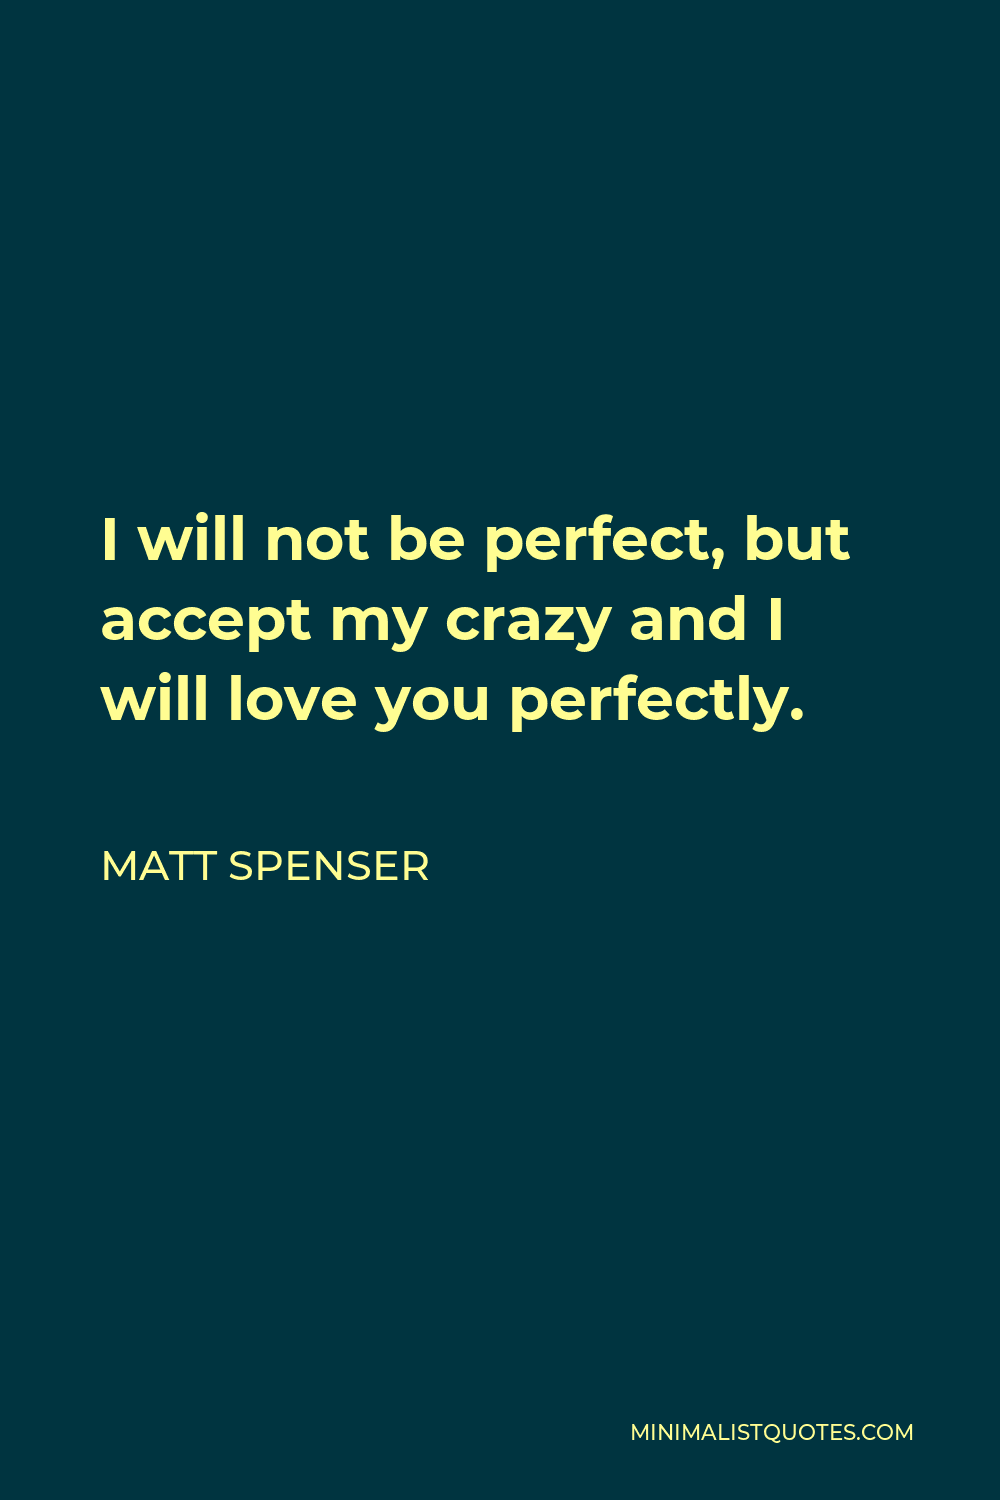 Matt Spenser Quote - I will not be perfect, but accept my crazy and I will love you perfectly.